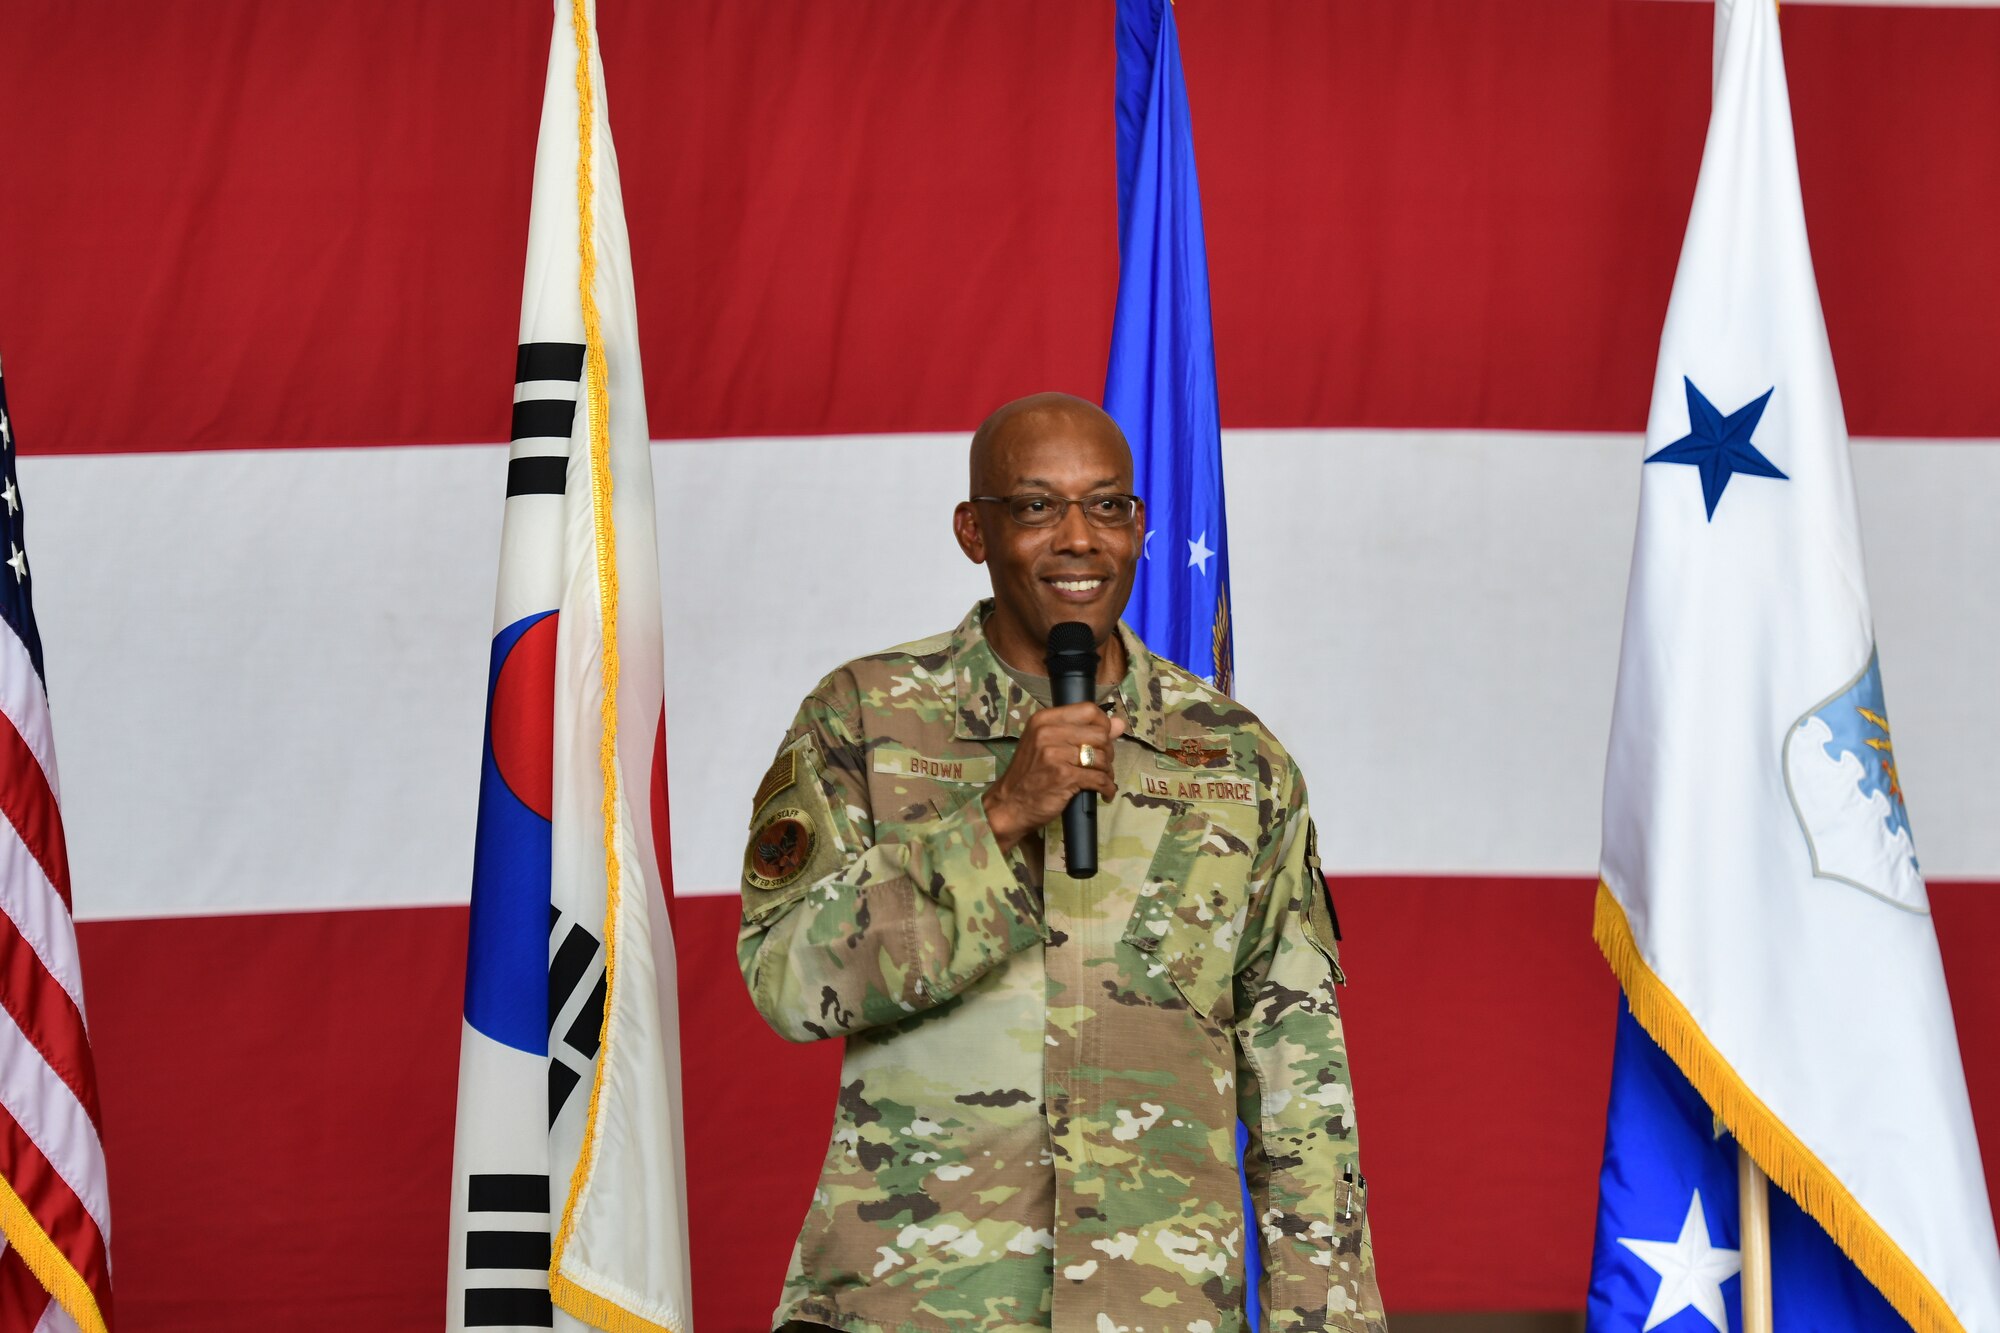 A military member speaks on a stage